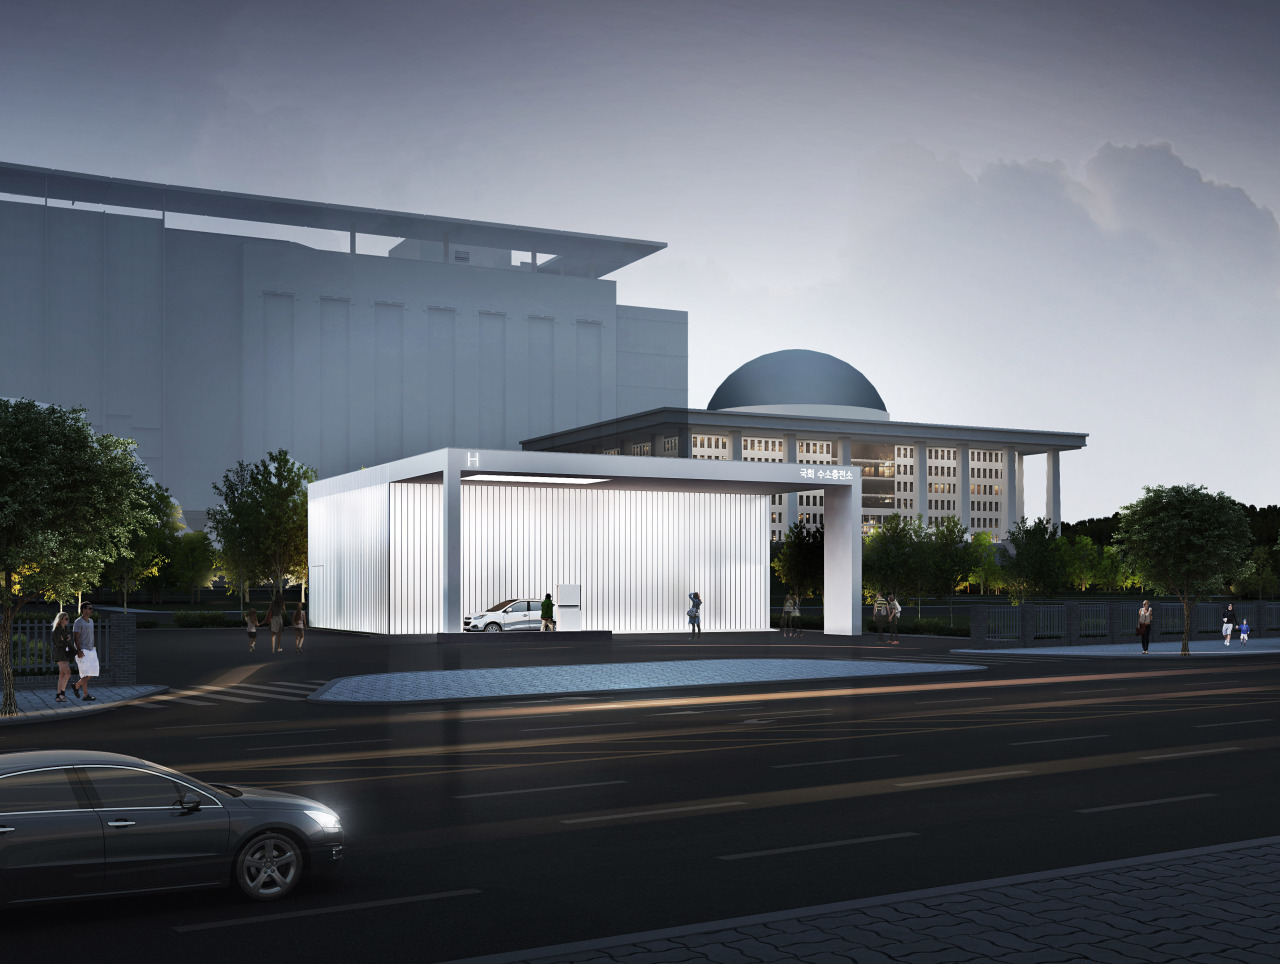 Architect Lim Jae-yong's impression of the planned hydrogen station at the Assembly (Hyundai Motor)